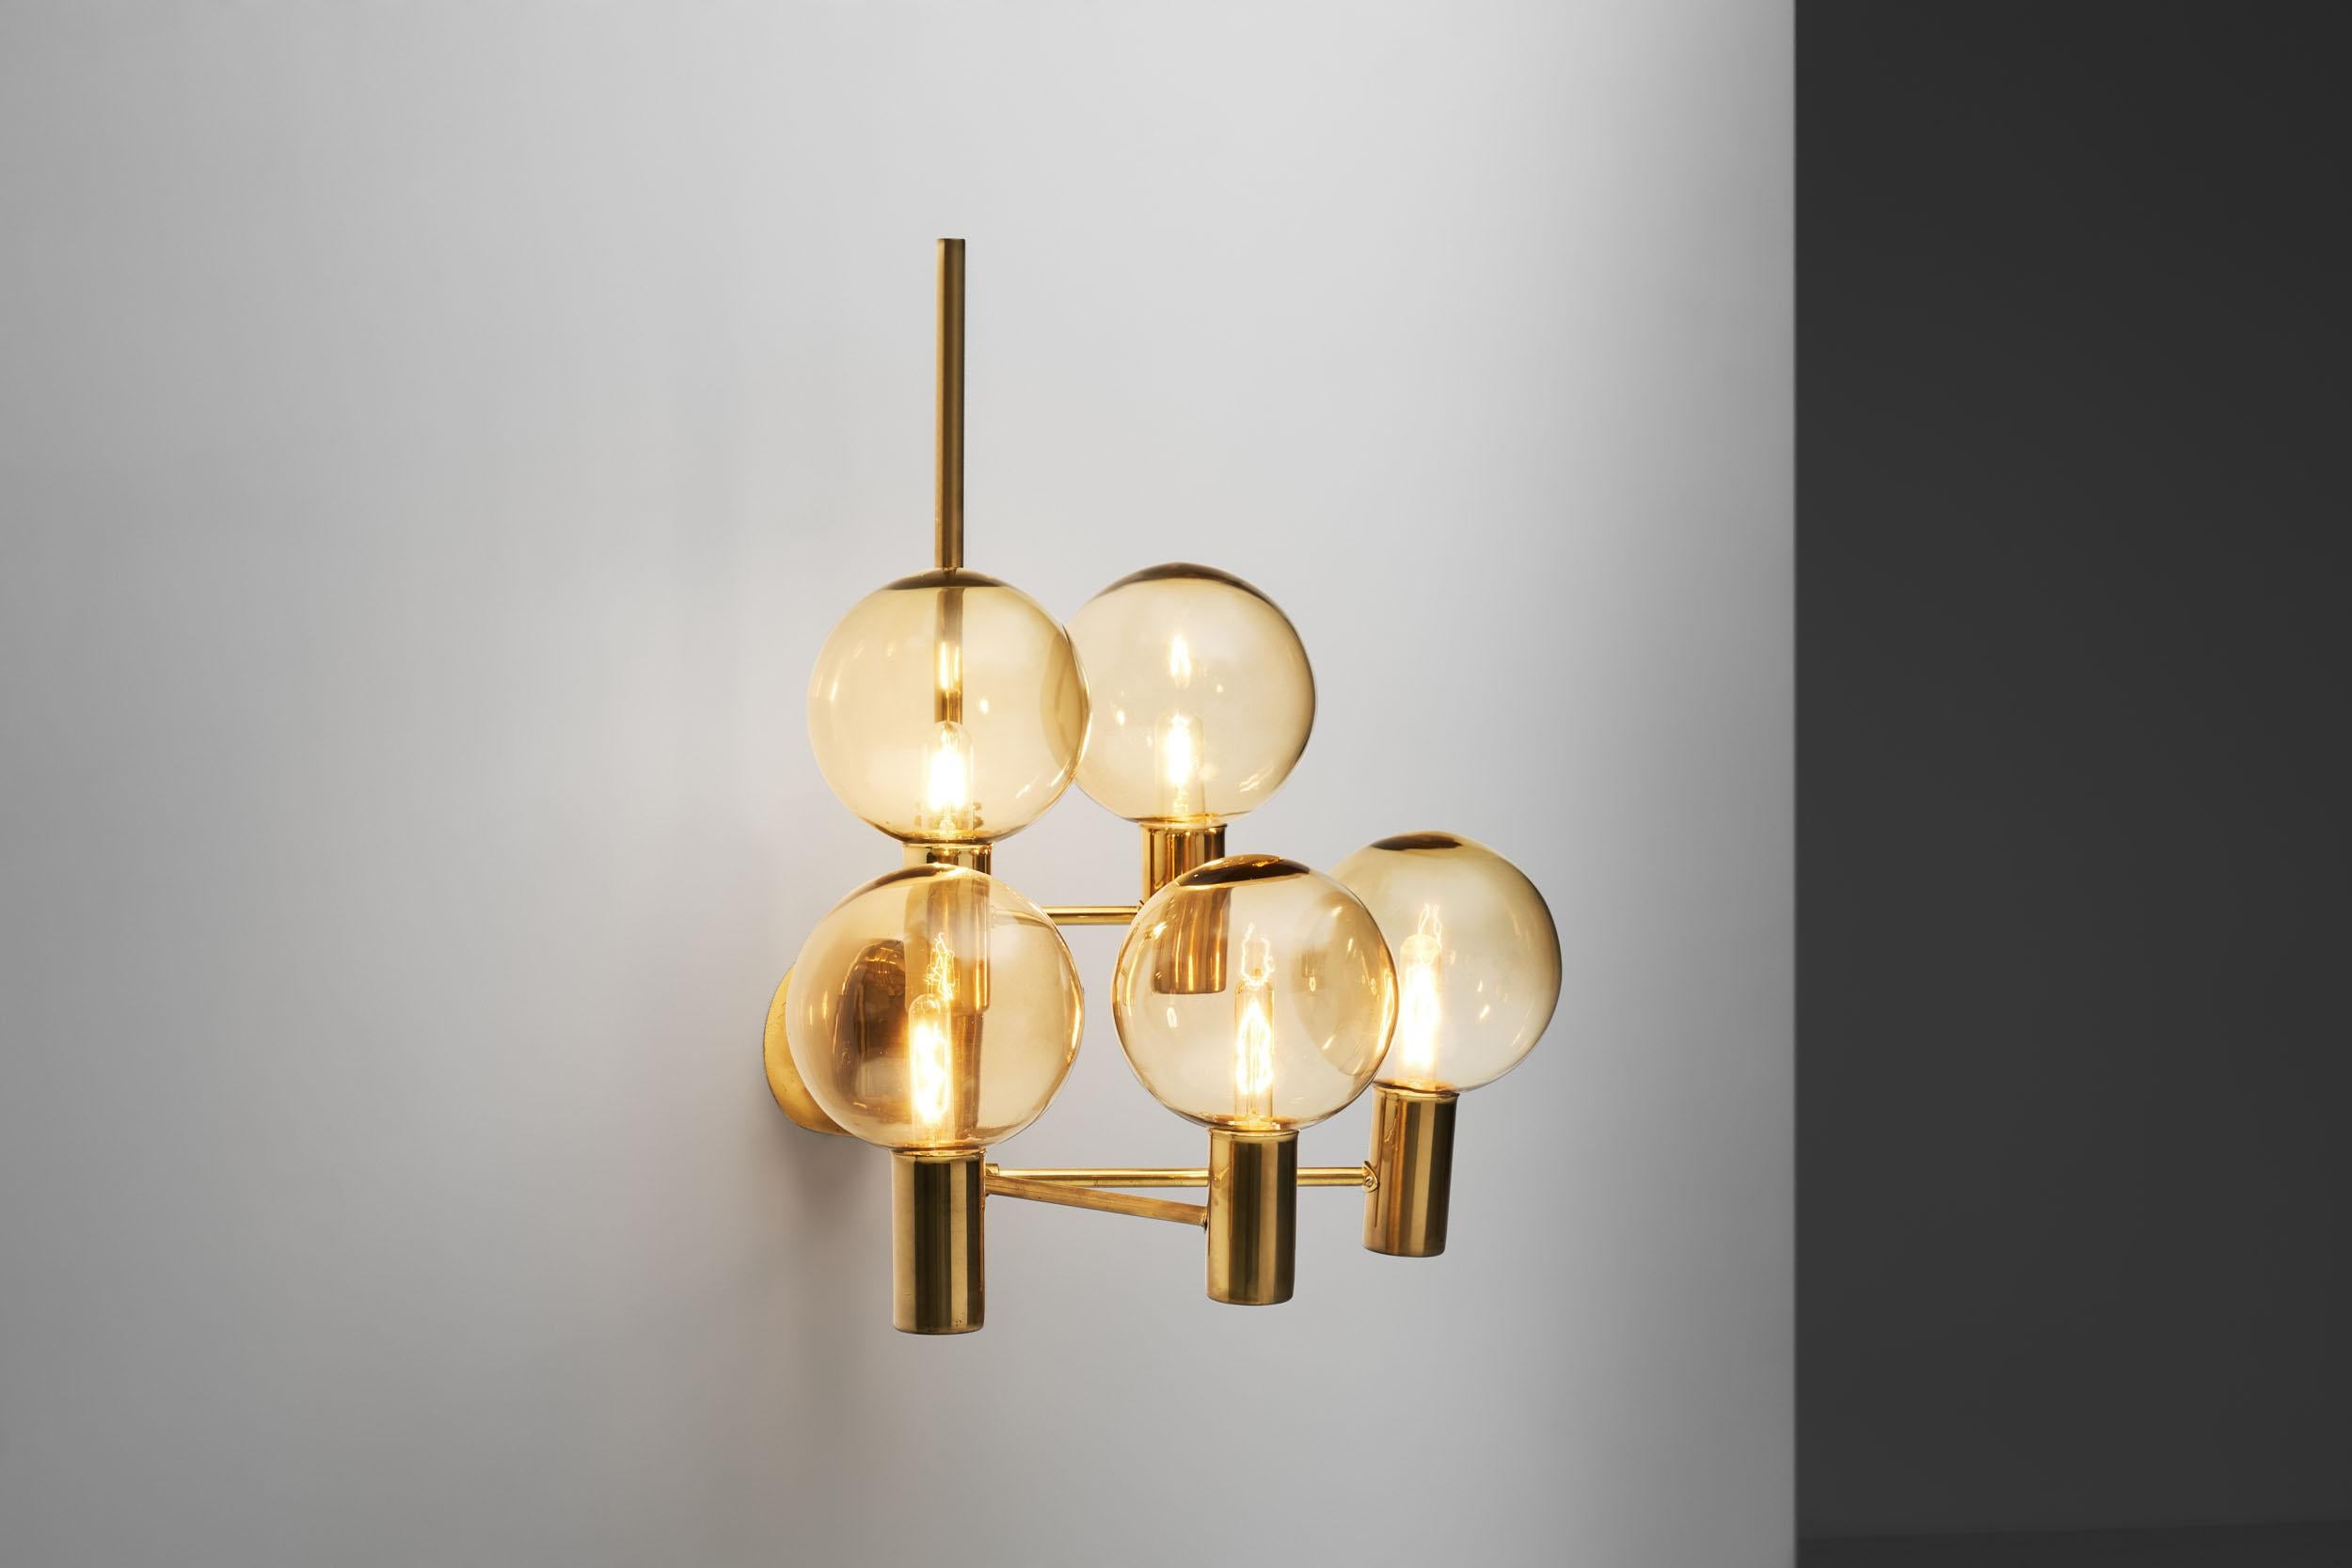 Scandinavian Modern Hans-Agne Jakobsson Brass Wall Lamp with Smoked Glass Shades, Sweden, 1960s For Sale